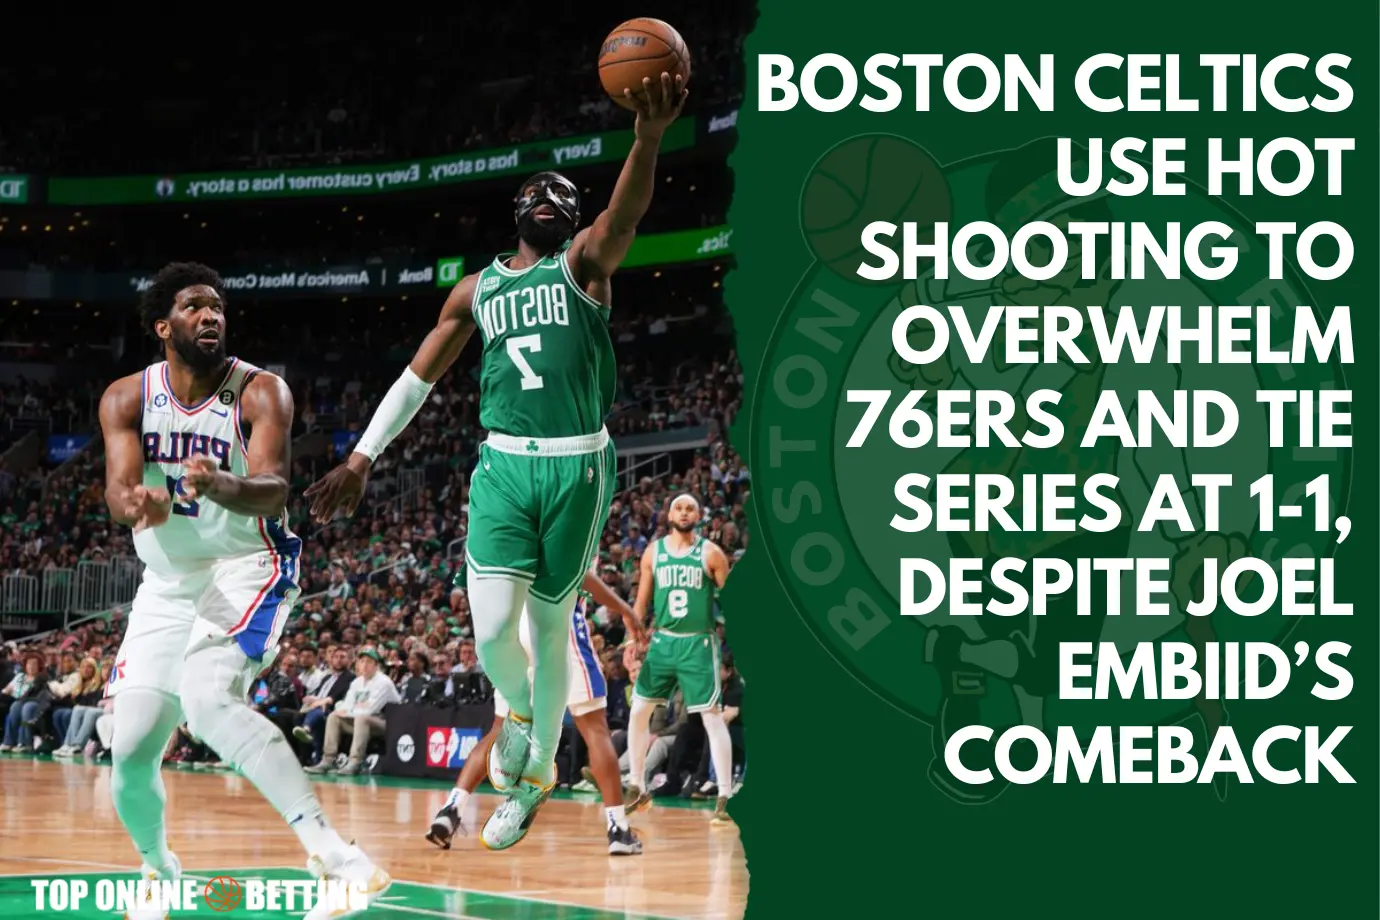 Boston Celtics Use Hot Shooting to Overwhelm 76ERS and Tie Series at 1-1, Despite Joel Embiid’s Comeback